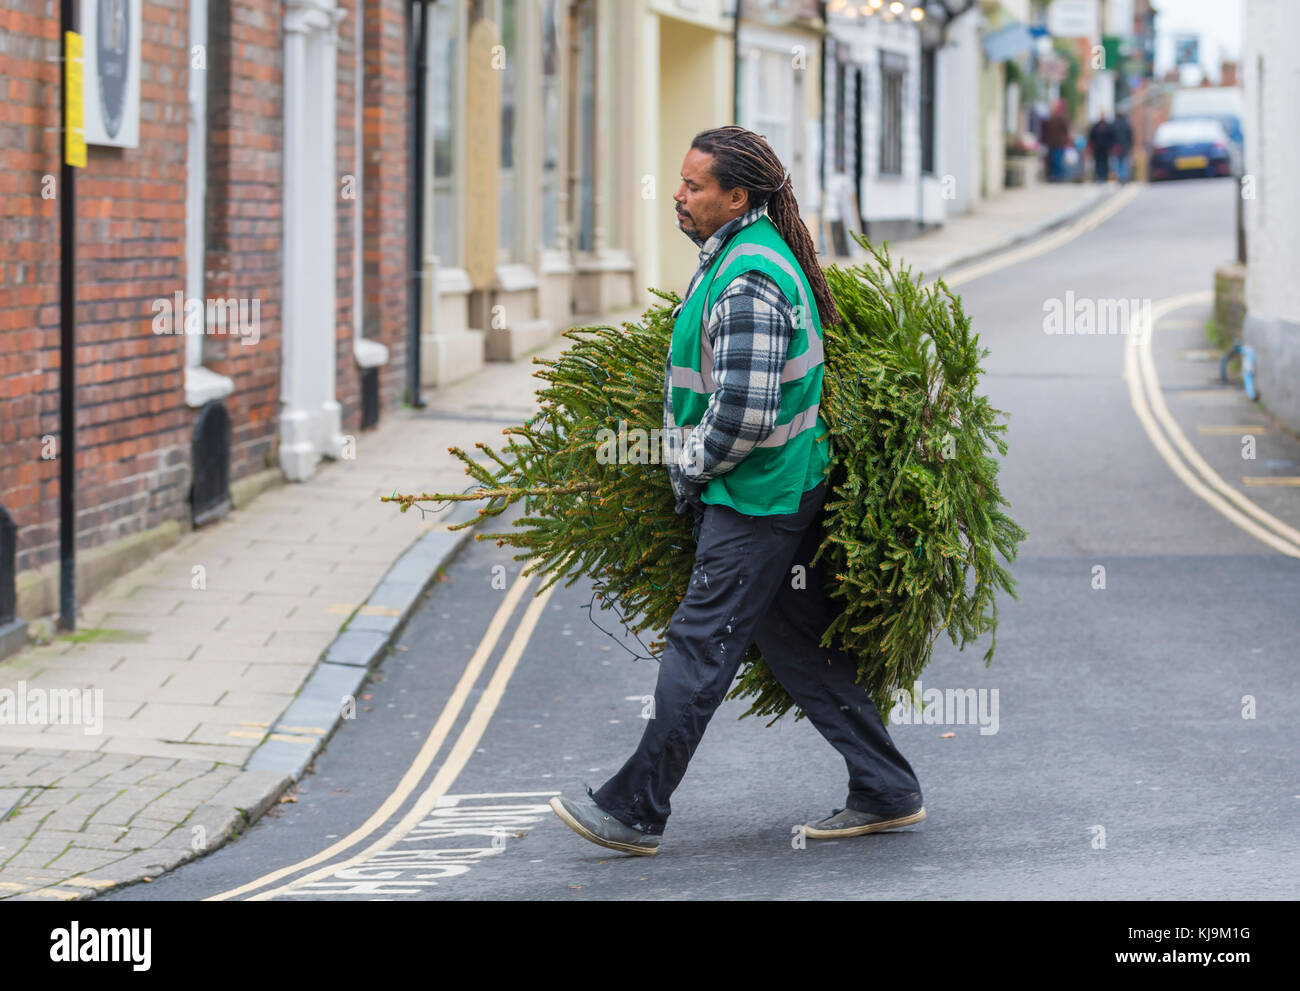 Man walking along carrying a Christmas tree in the UK. Stock Photo